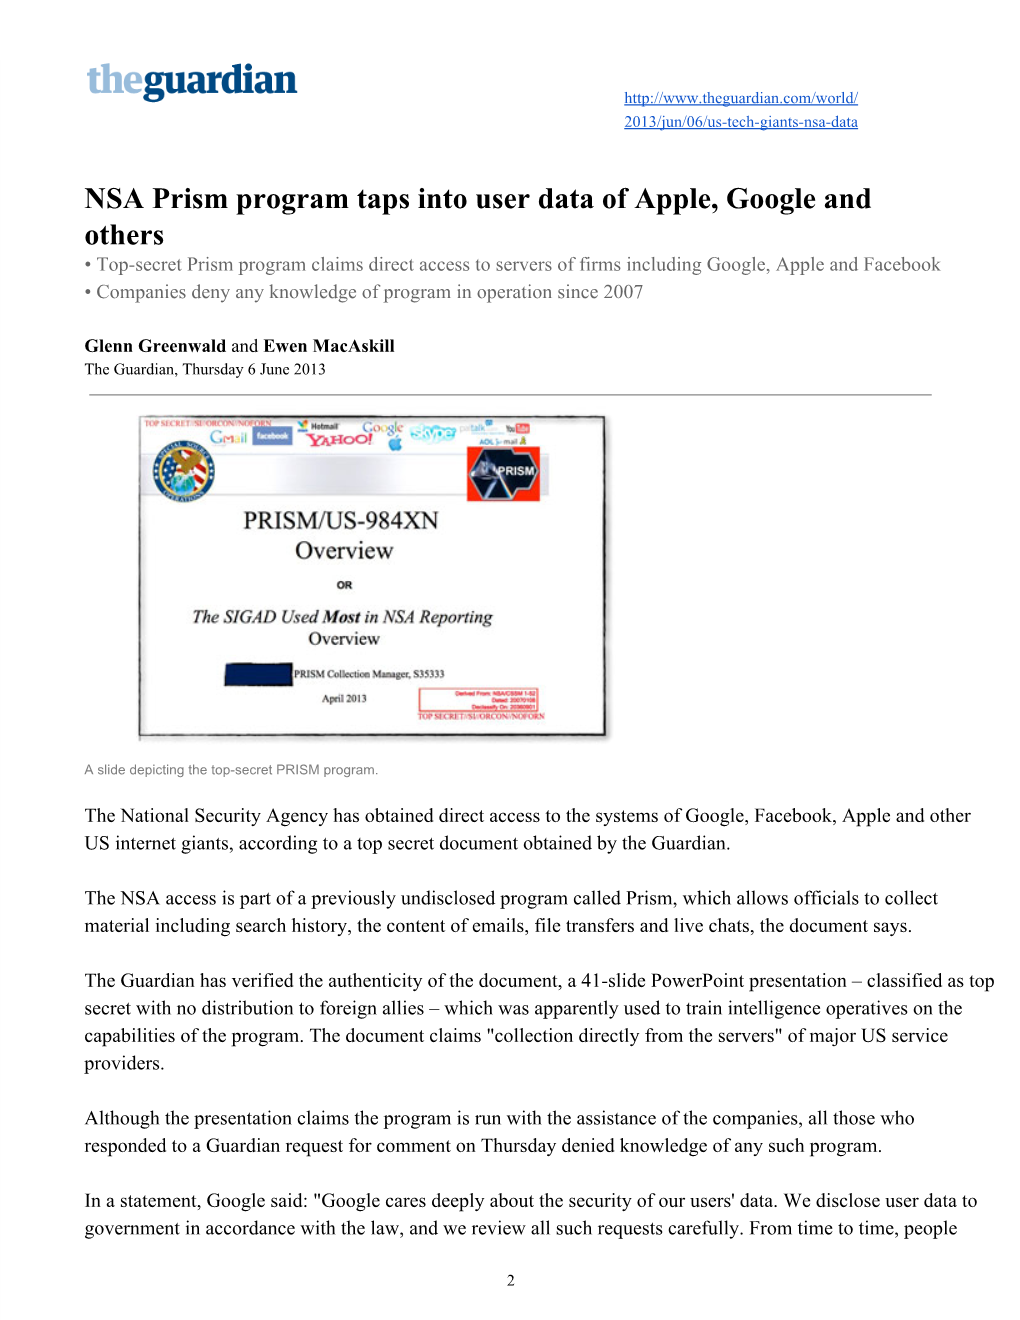 NSA Prism Program Taps Into User Data of Apple, Google and Others